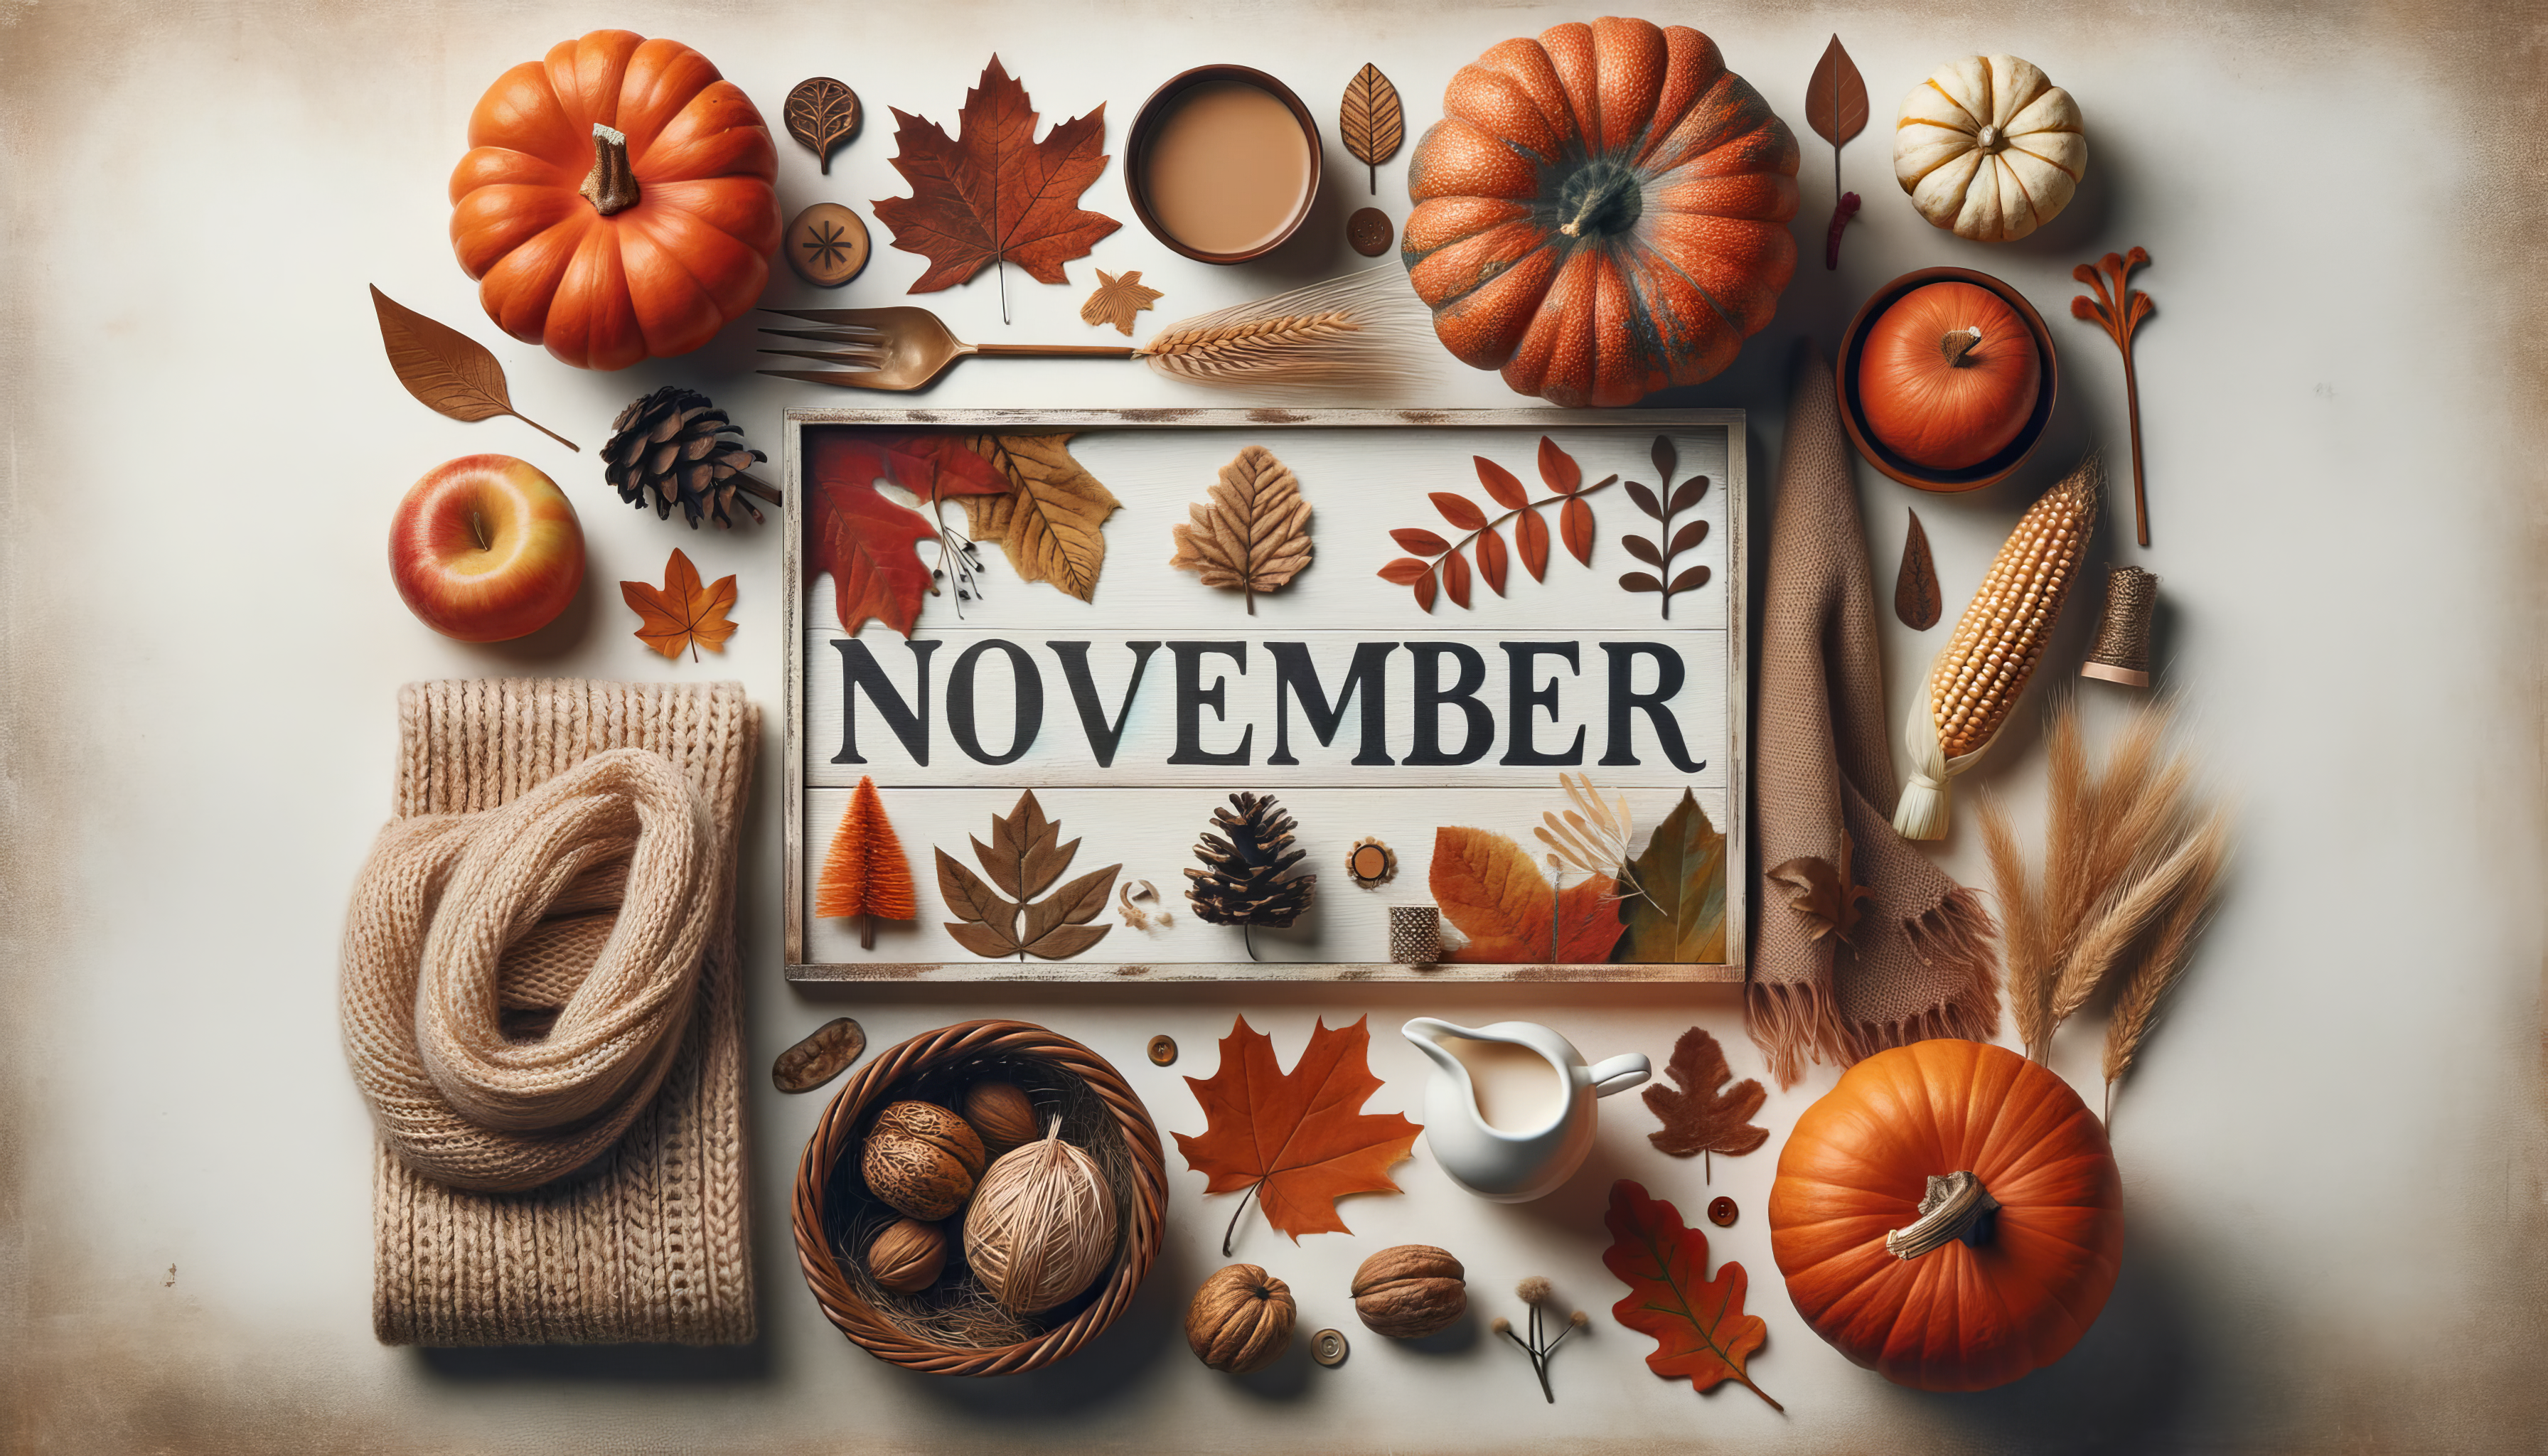 Cozy November themed desktop wallpaper with pumpkins, autumn leaves, nuts, and a warm sweater surrounding a sign with the word November.